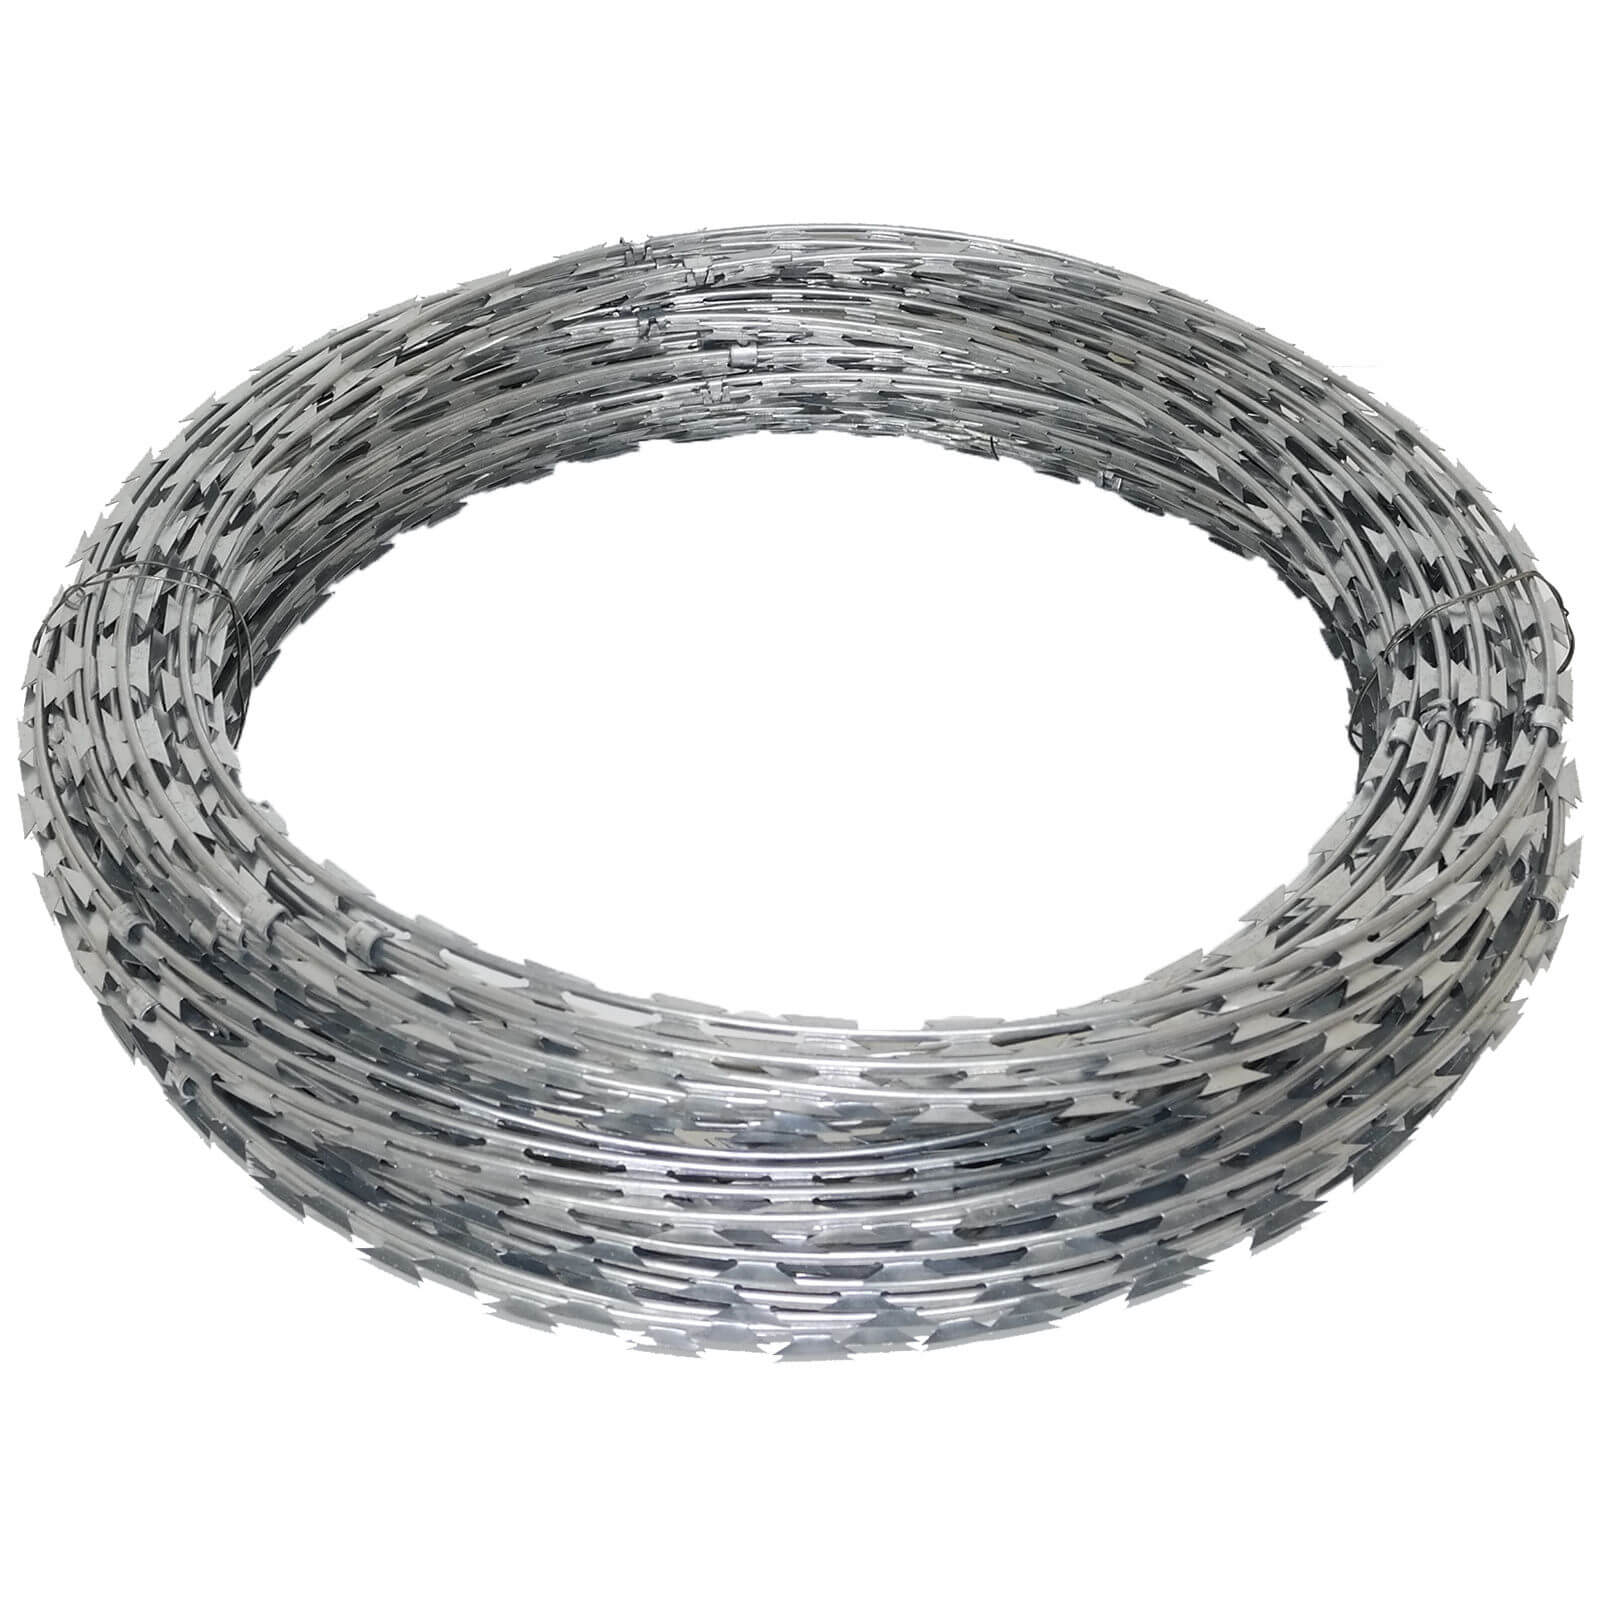 Razor wire fences - securing your properties from intruders